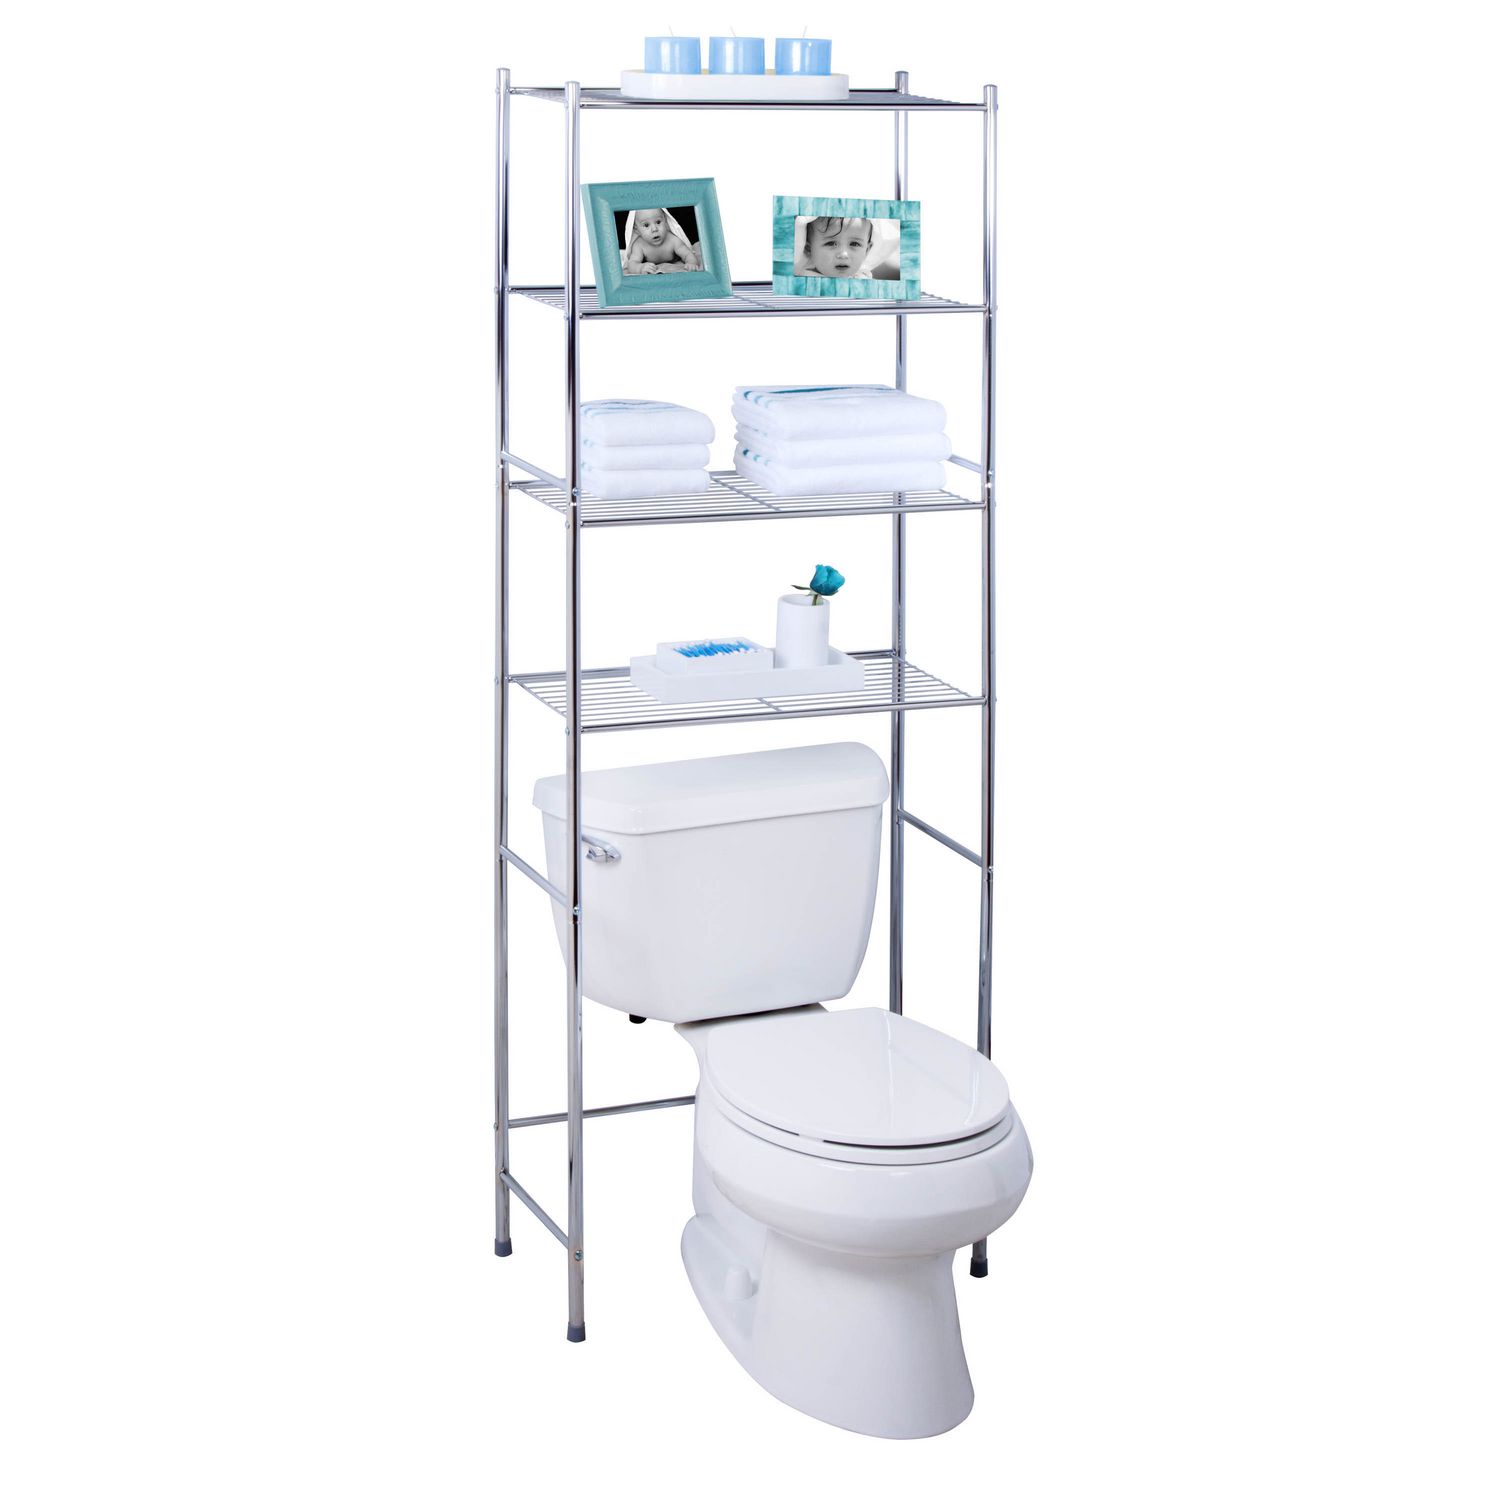 4 Tier Over The Toilet Shelving Unit, Bathroom Over The Toilet Cabinets Canada